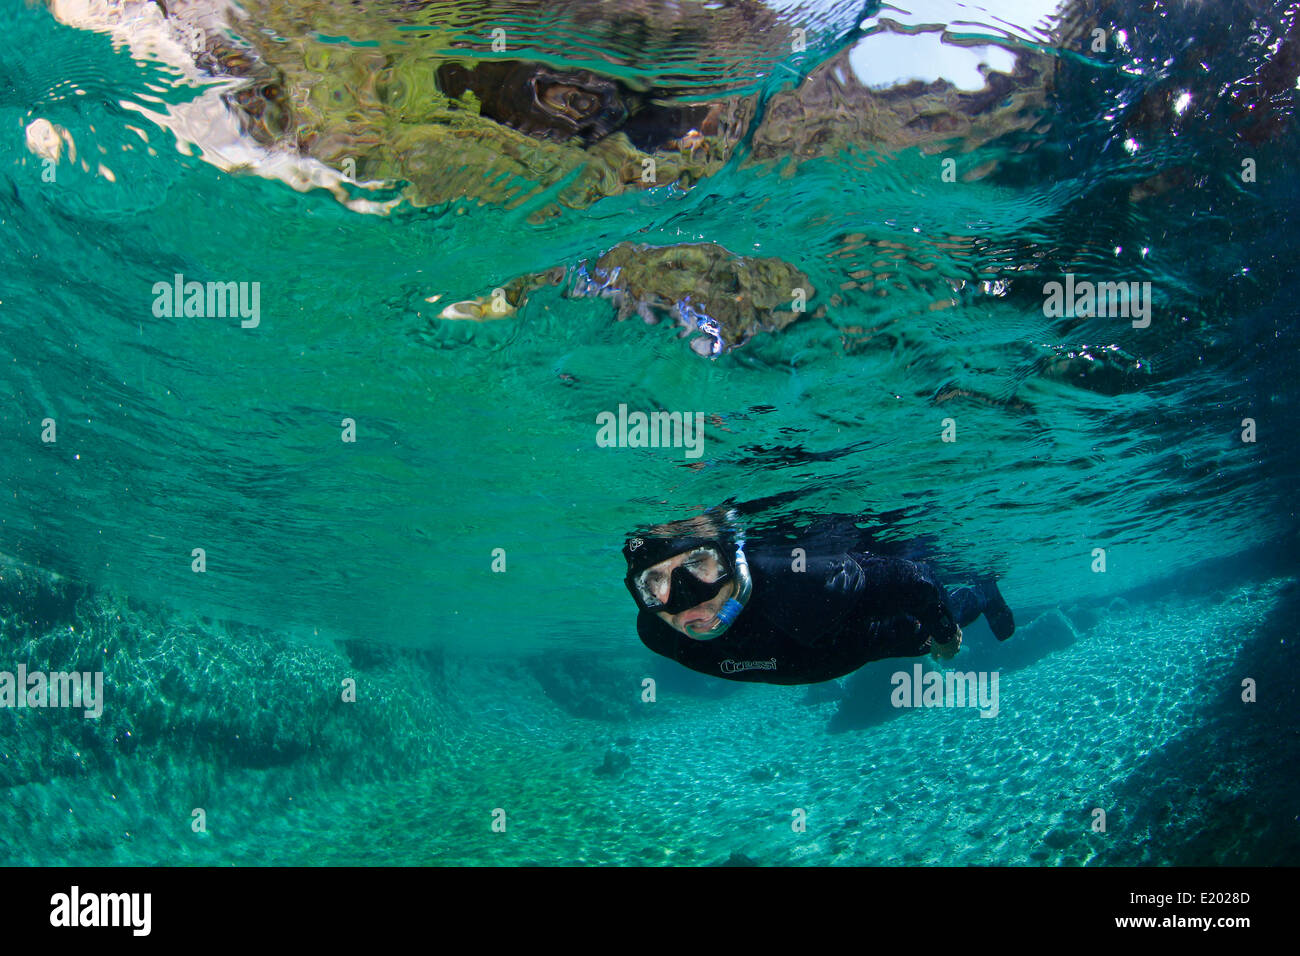 Snorkel in a river (Fresh water) Stock Photo